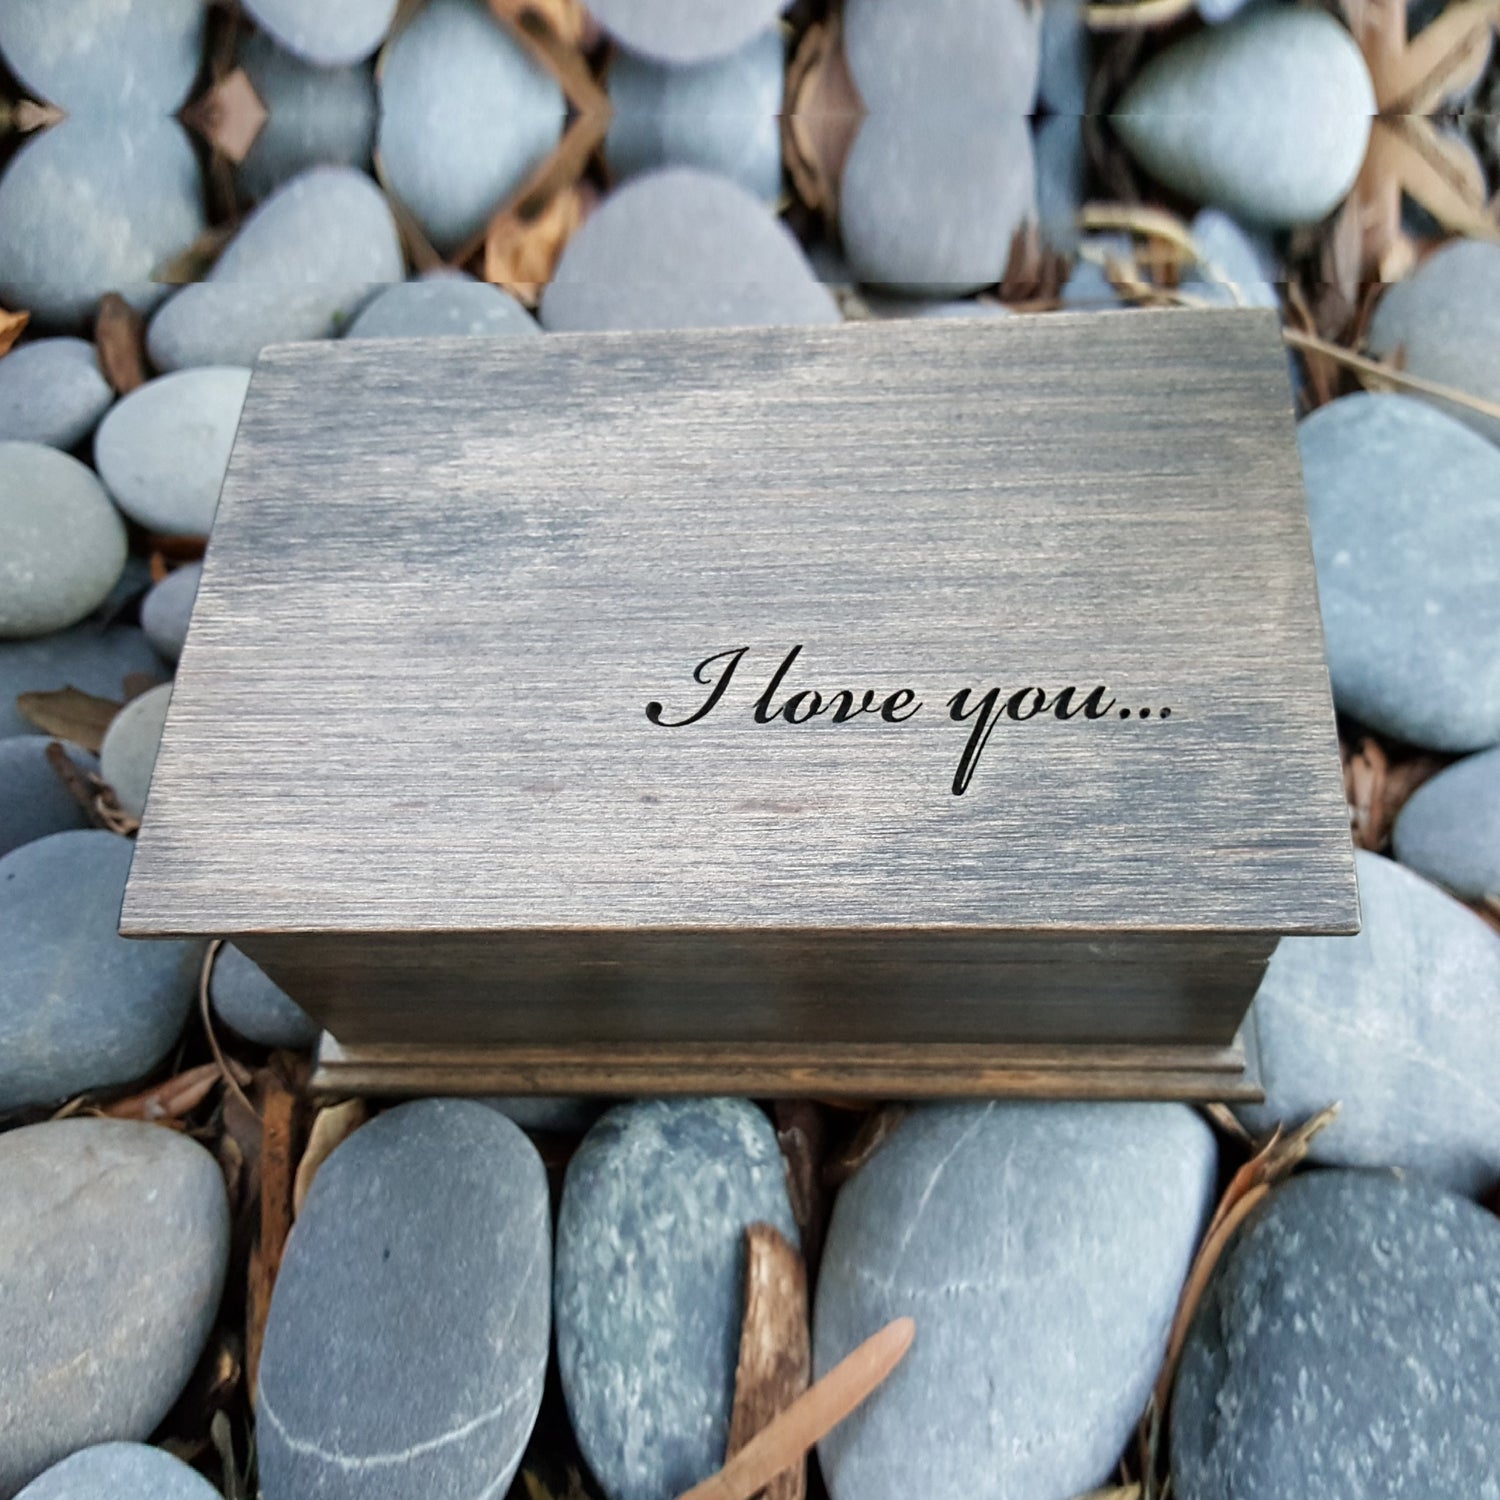 I love you box, engraved wooden jewelry box with I love you ... engraved in the lower right corner